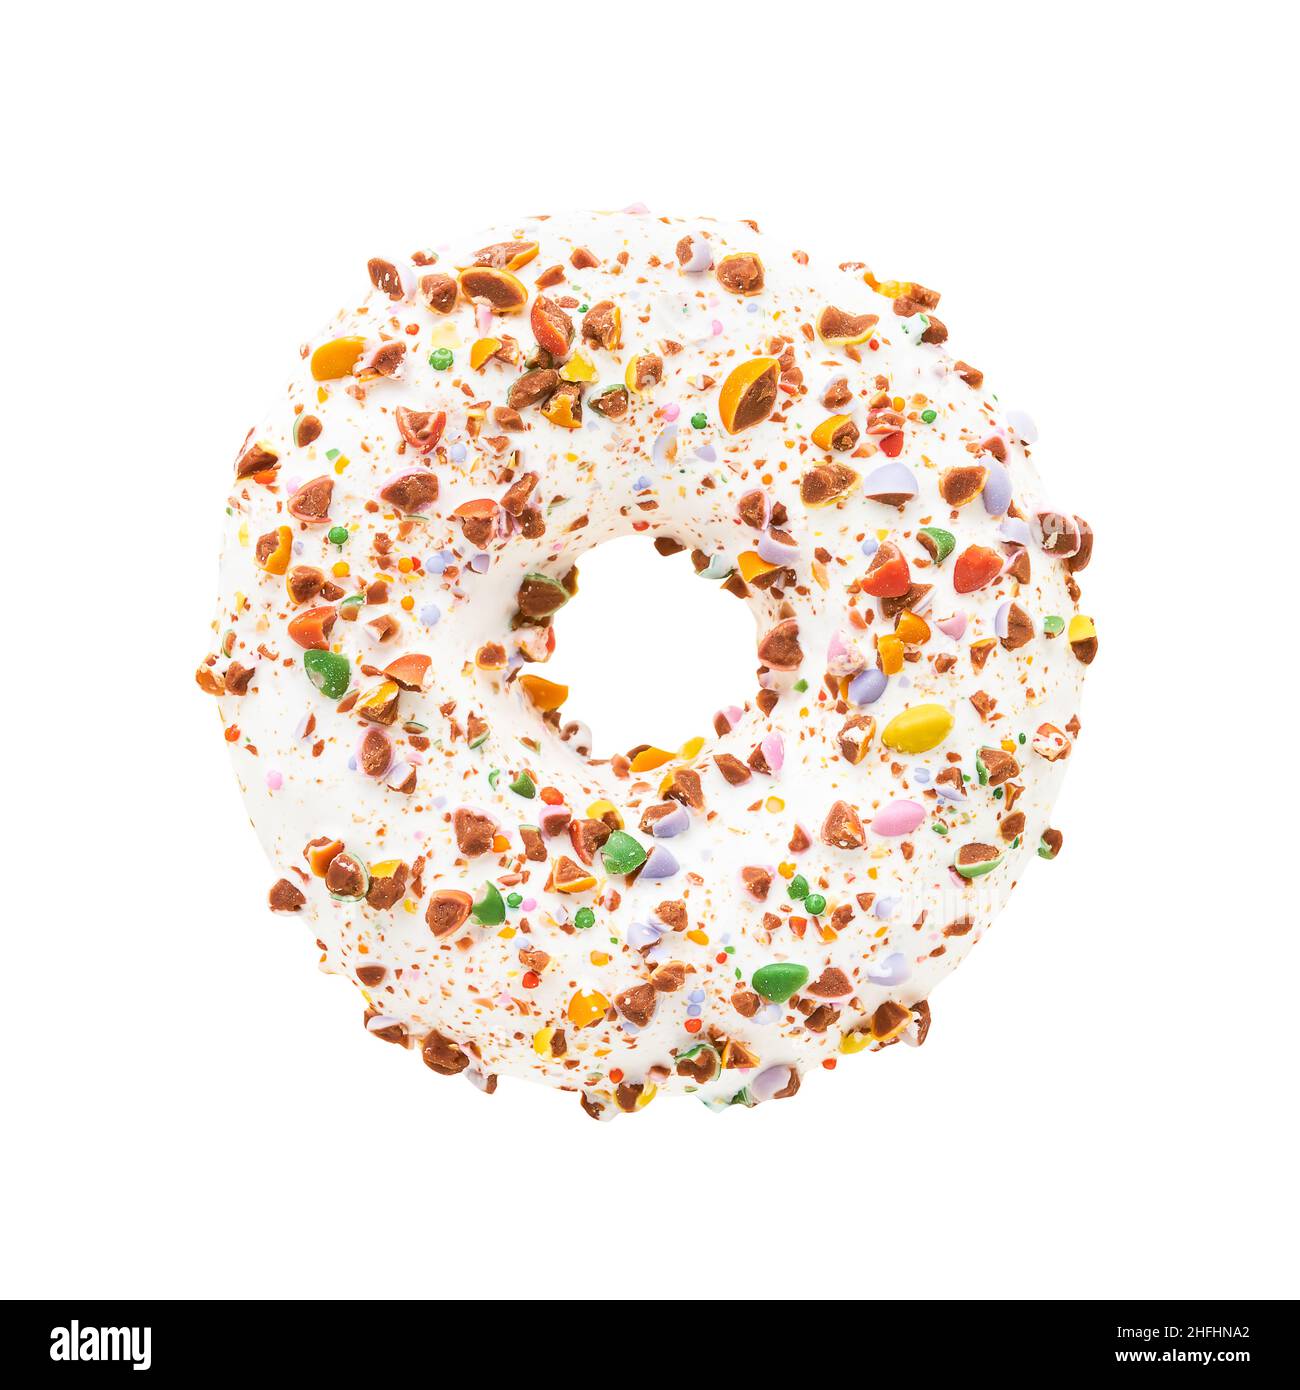 Candy Donut in white glaze with colorful candy sprinkles isolated over white background with clipping path. Stock Photo